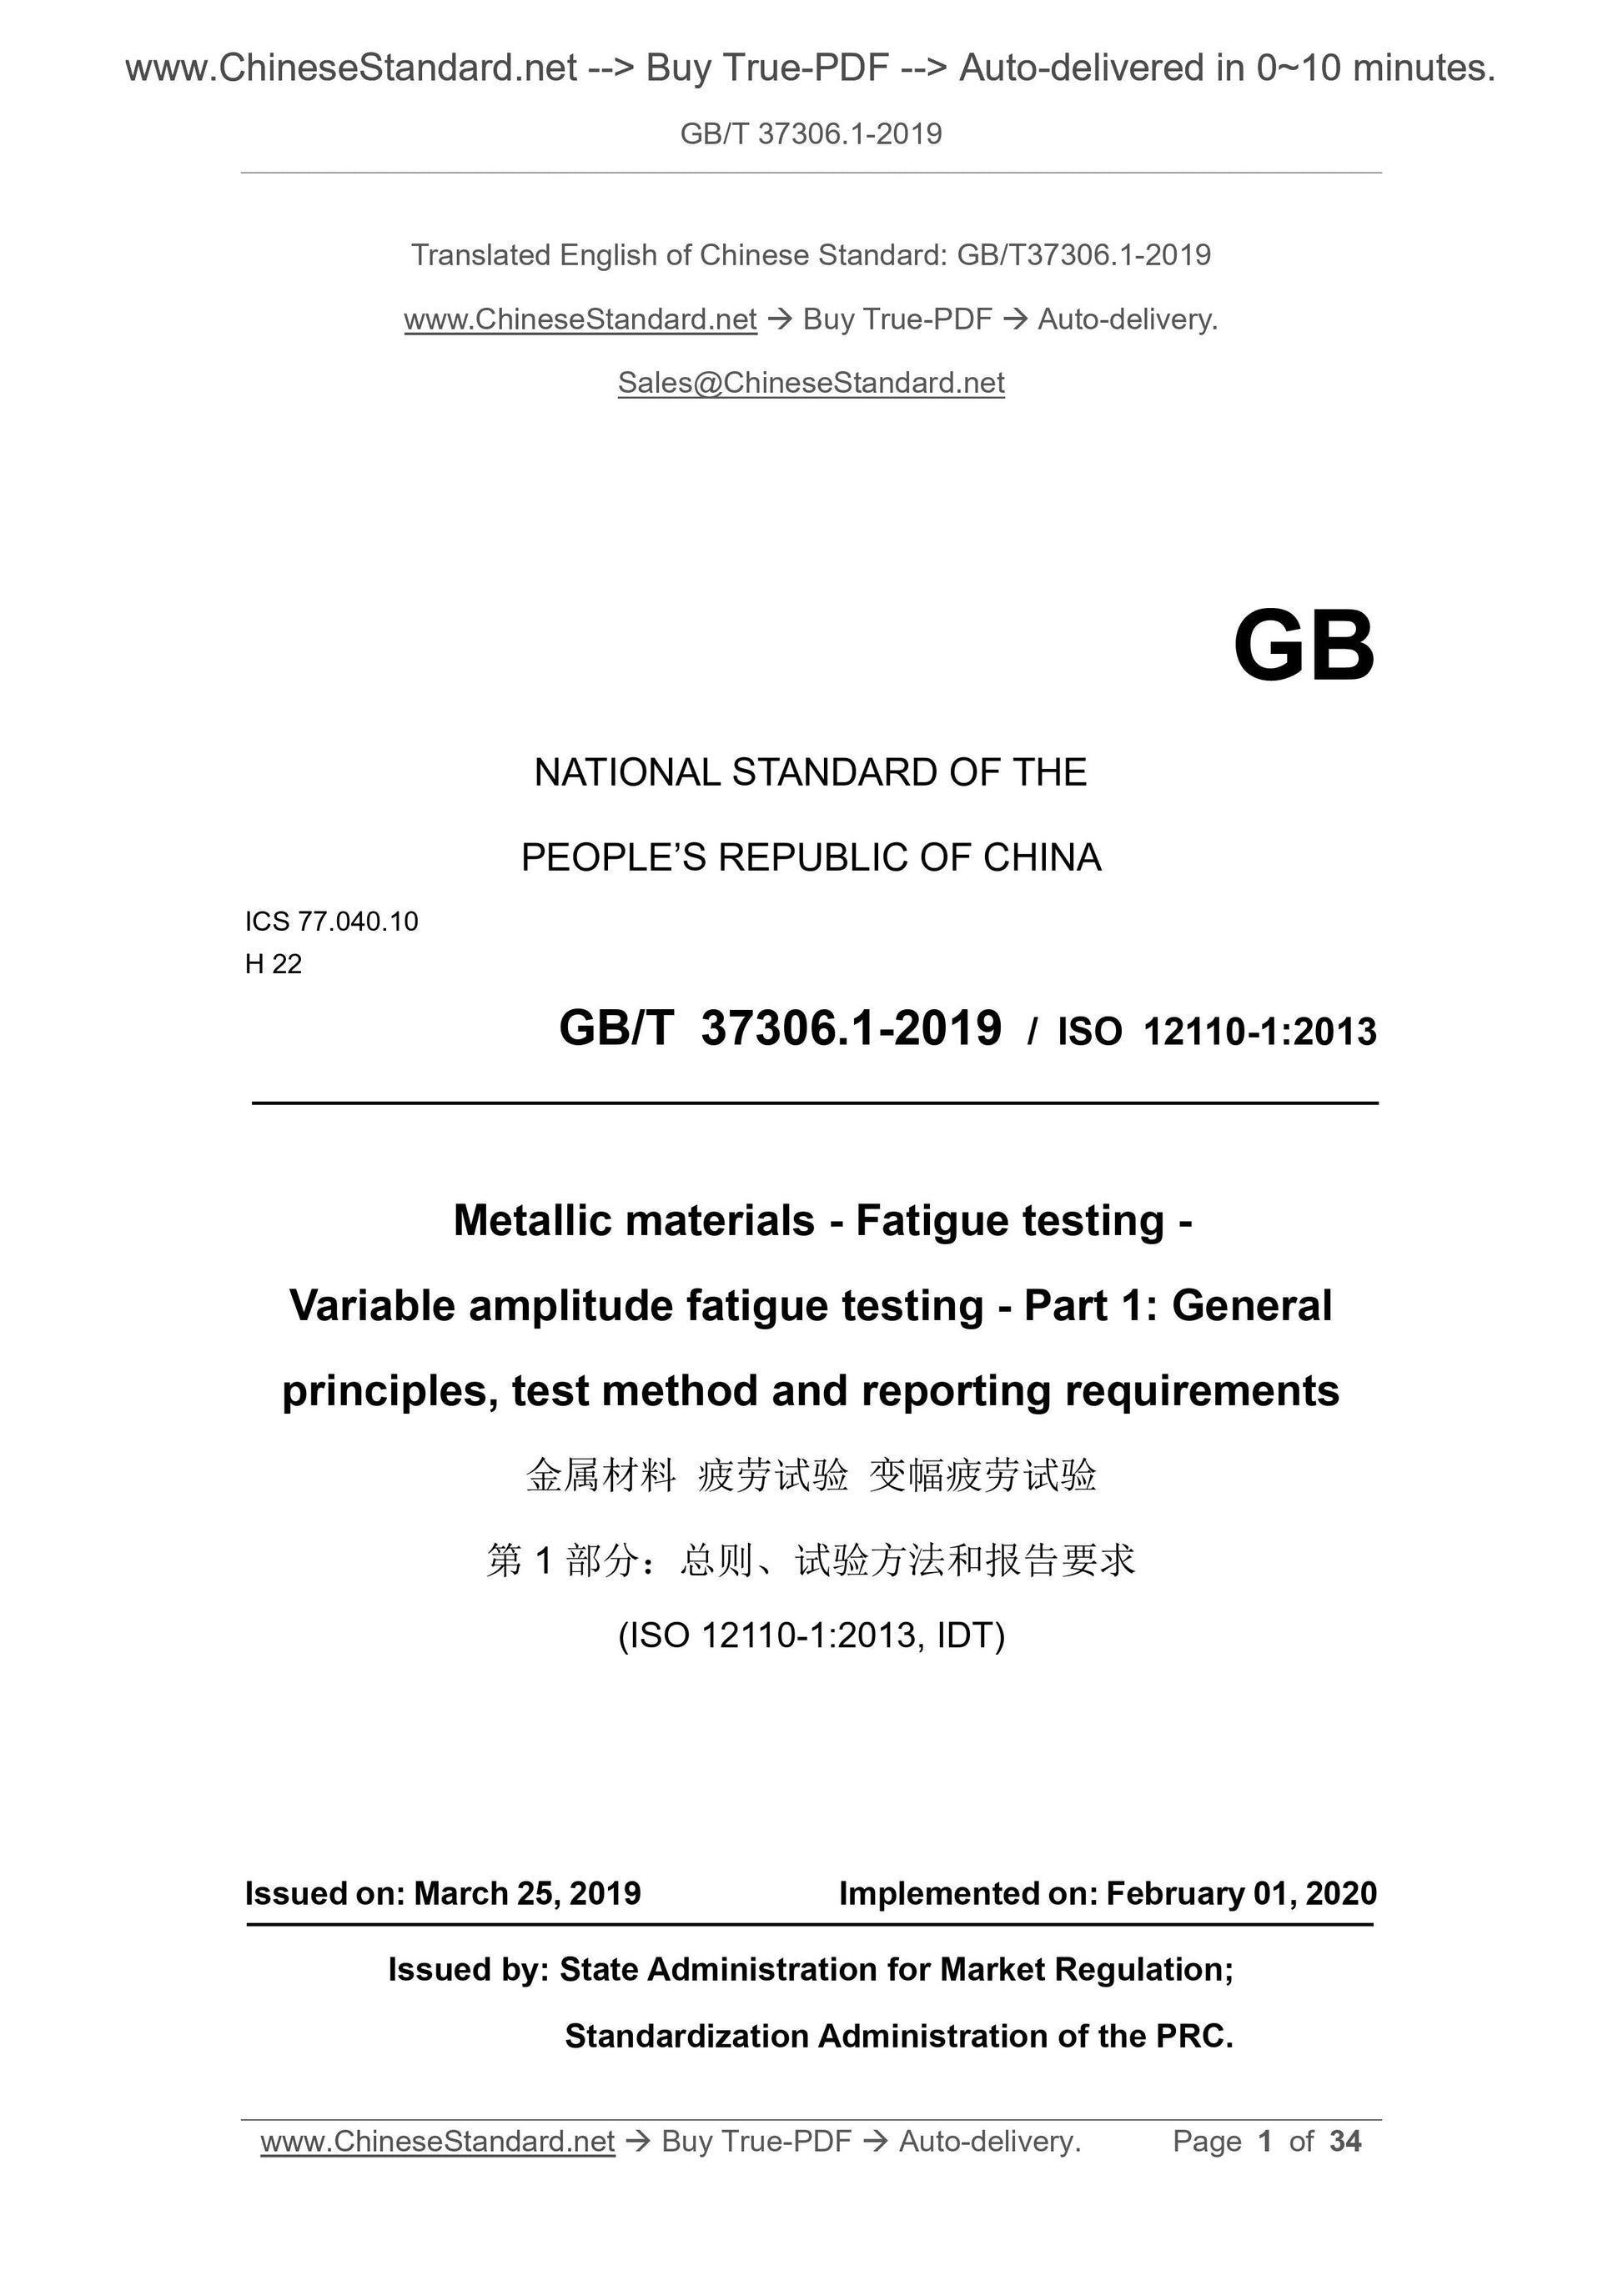 GB/T 37306.1-2019 Page 1